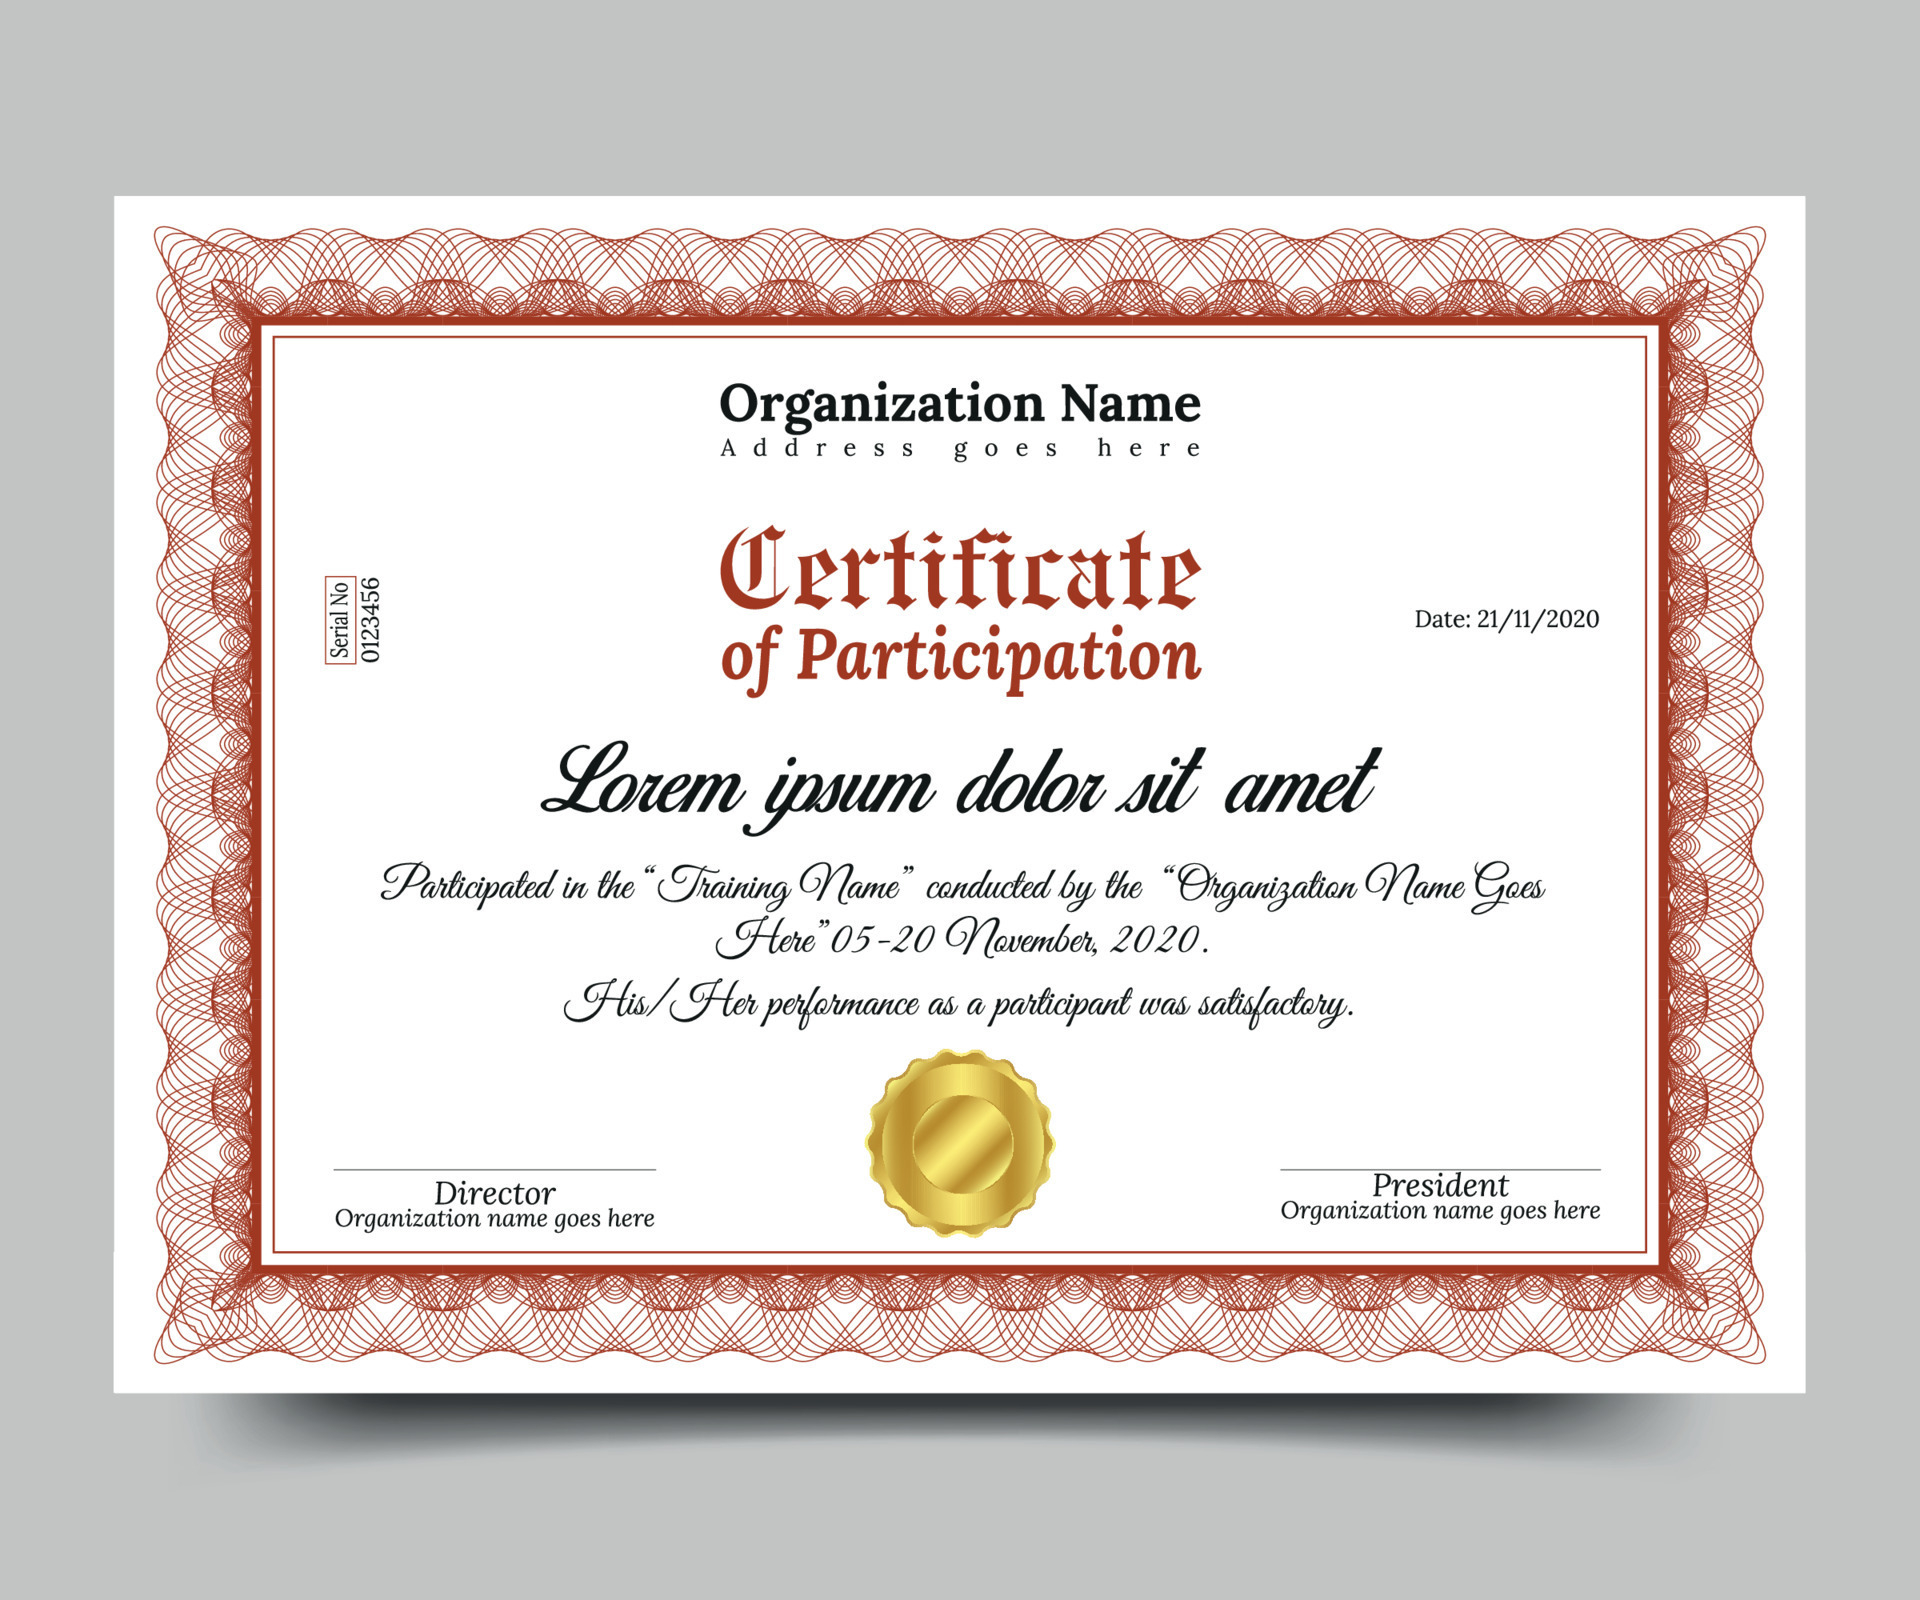 Certificate of Participation Template Free Vector 10 Vector  With Regard To Certification Of Participation Free Template